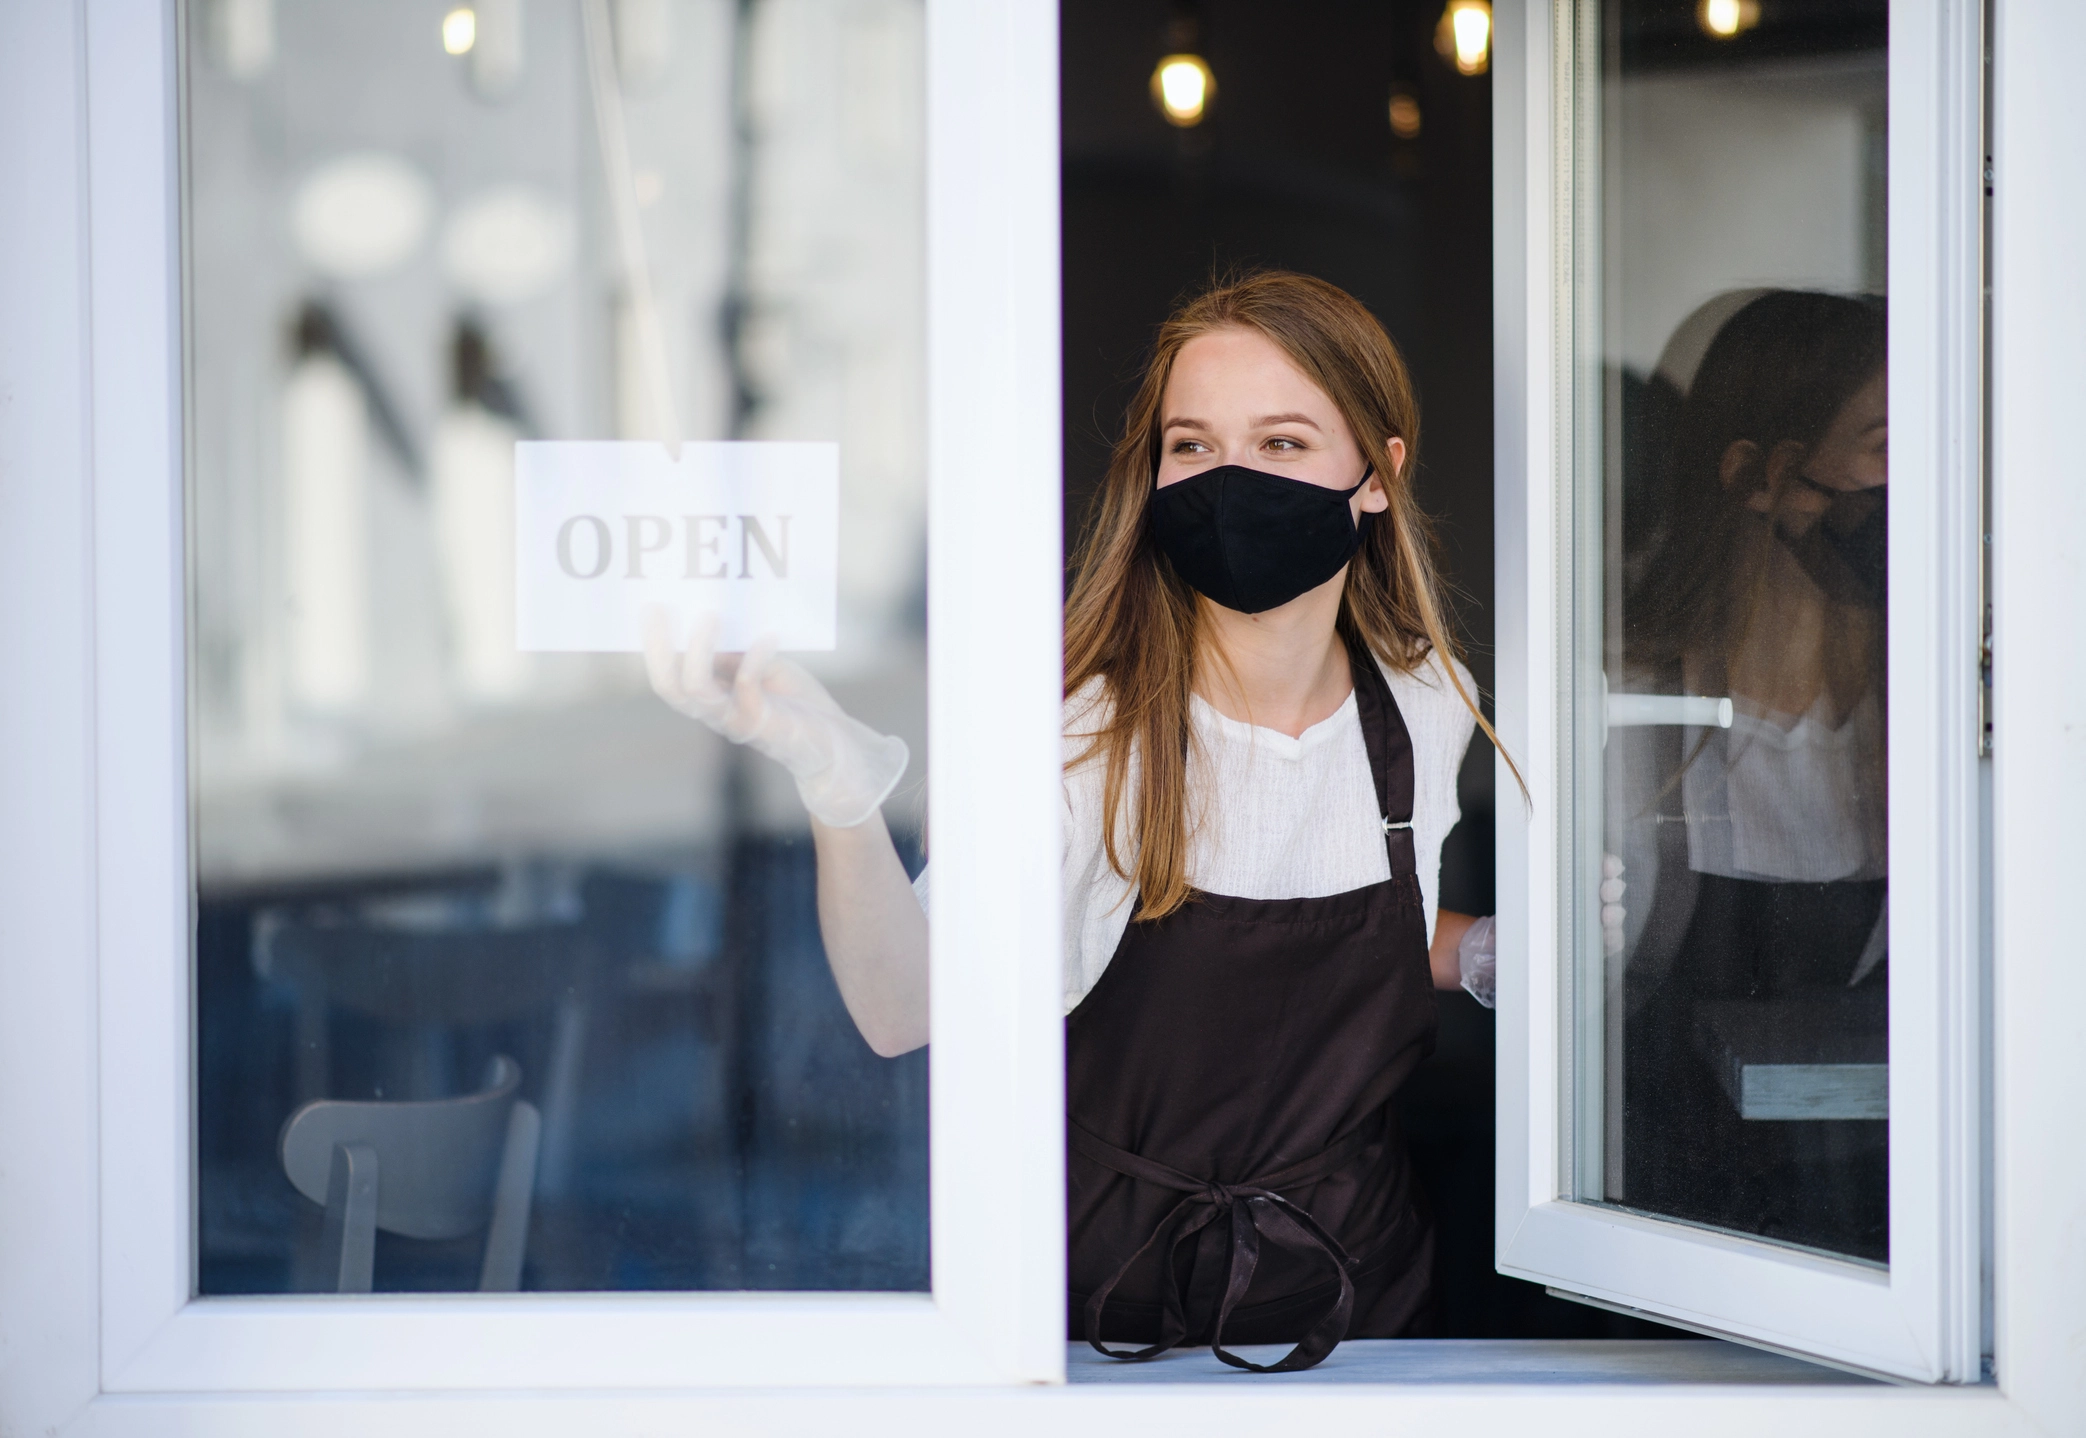 A woman wearing a mask turns the Open sign in a window